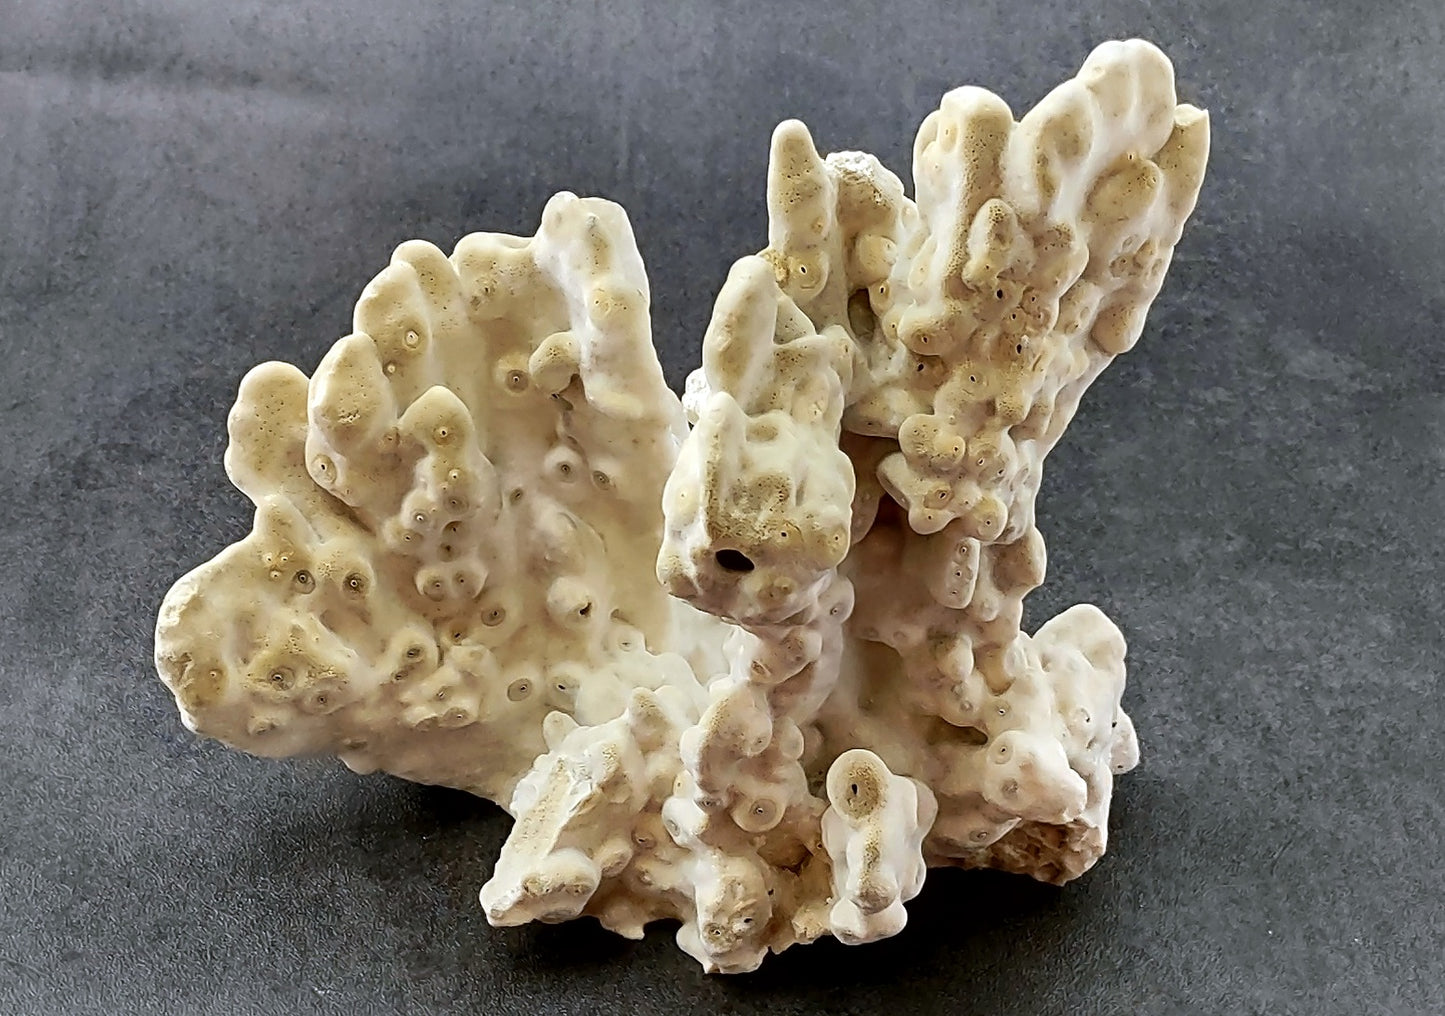 Fire Coral - Millepora Exesa - (Approx. 7-8 inches). White shell with many different layers including little ribbing and crustaceans. Copyright 2022 SeaShellSupply.com.